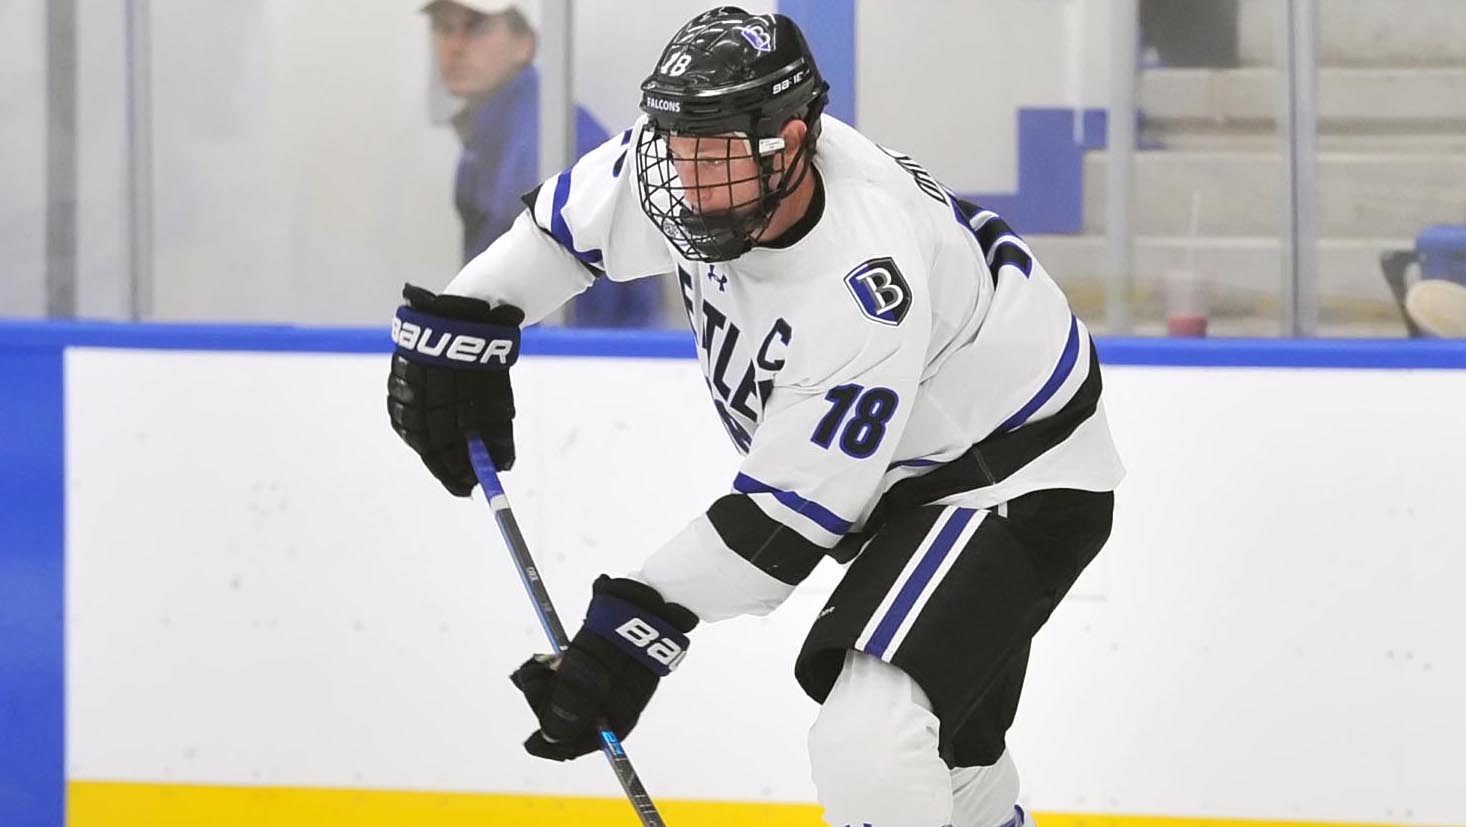 Bentley Returns to the Ice This Week to Face Brown and Holy Cross